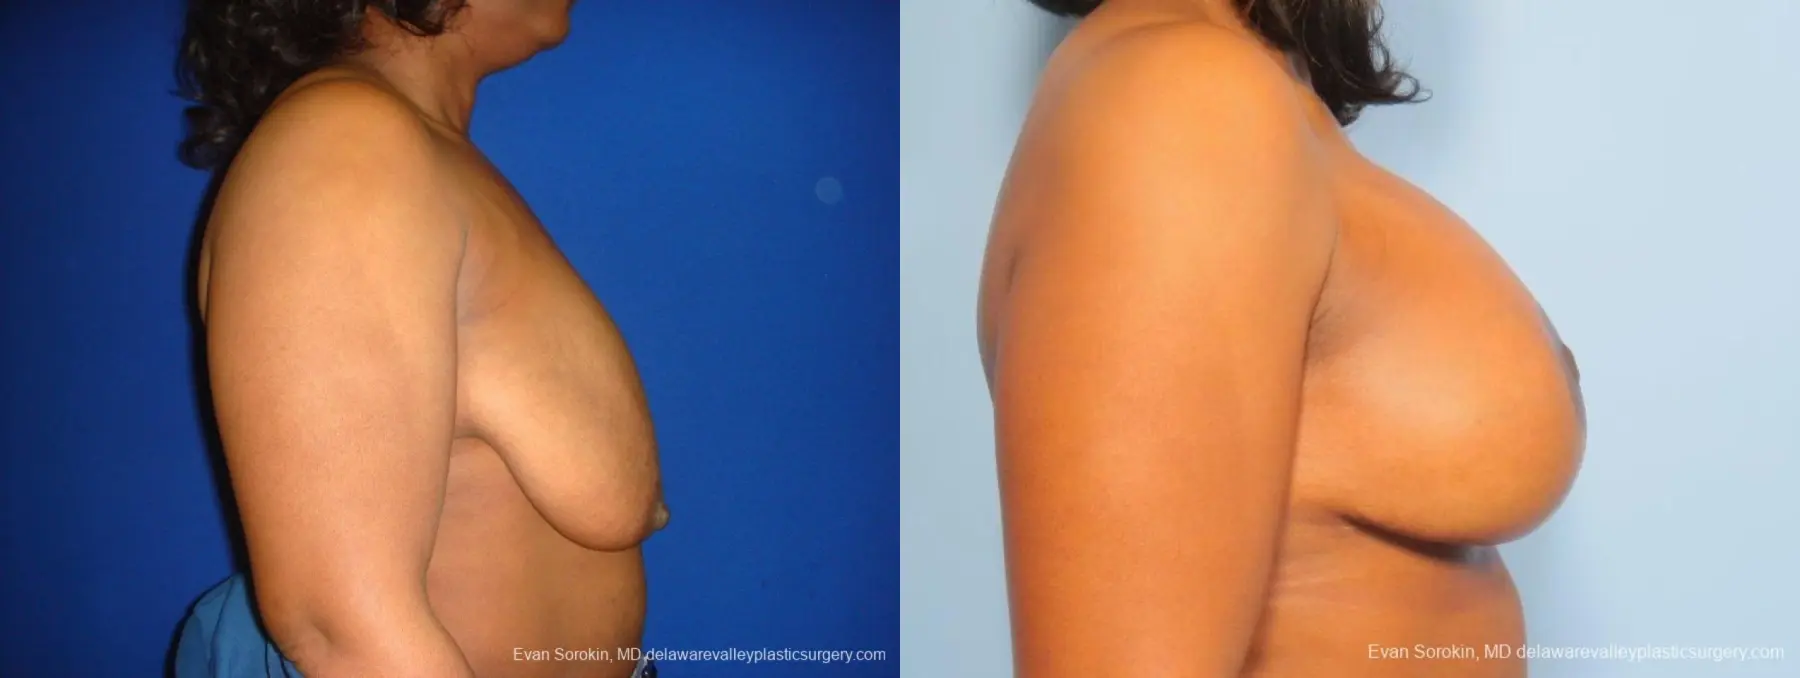 Philadelphia Breast Lift and Augmentation 8684 - Before and After 4